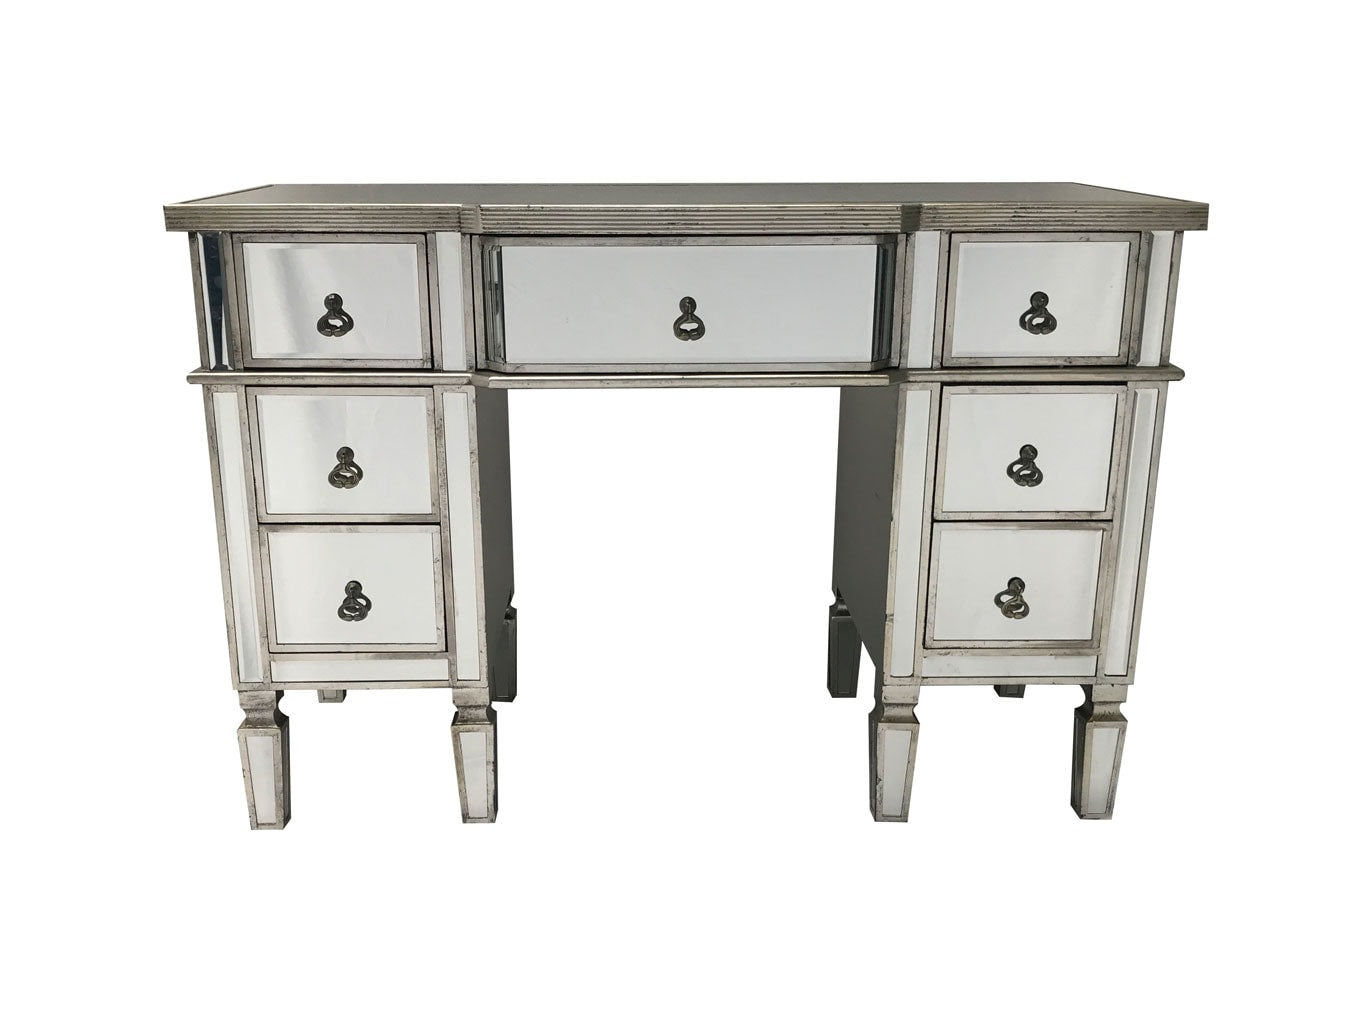 Mirrored dressing table with 7 drawers